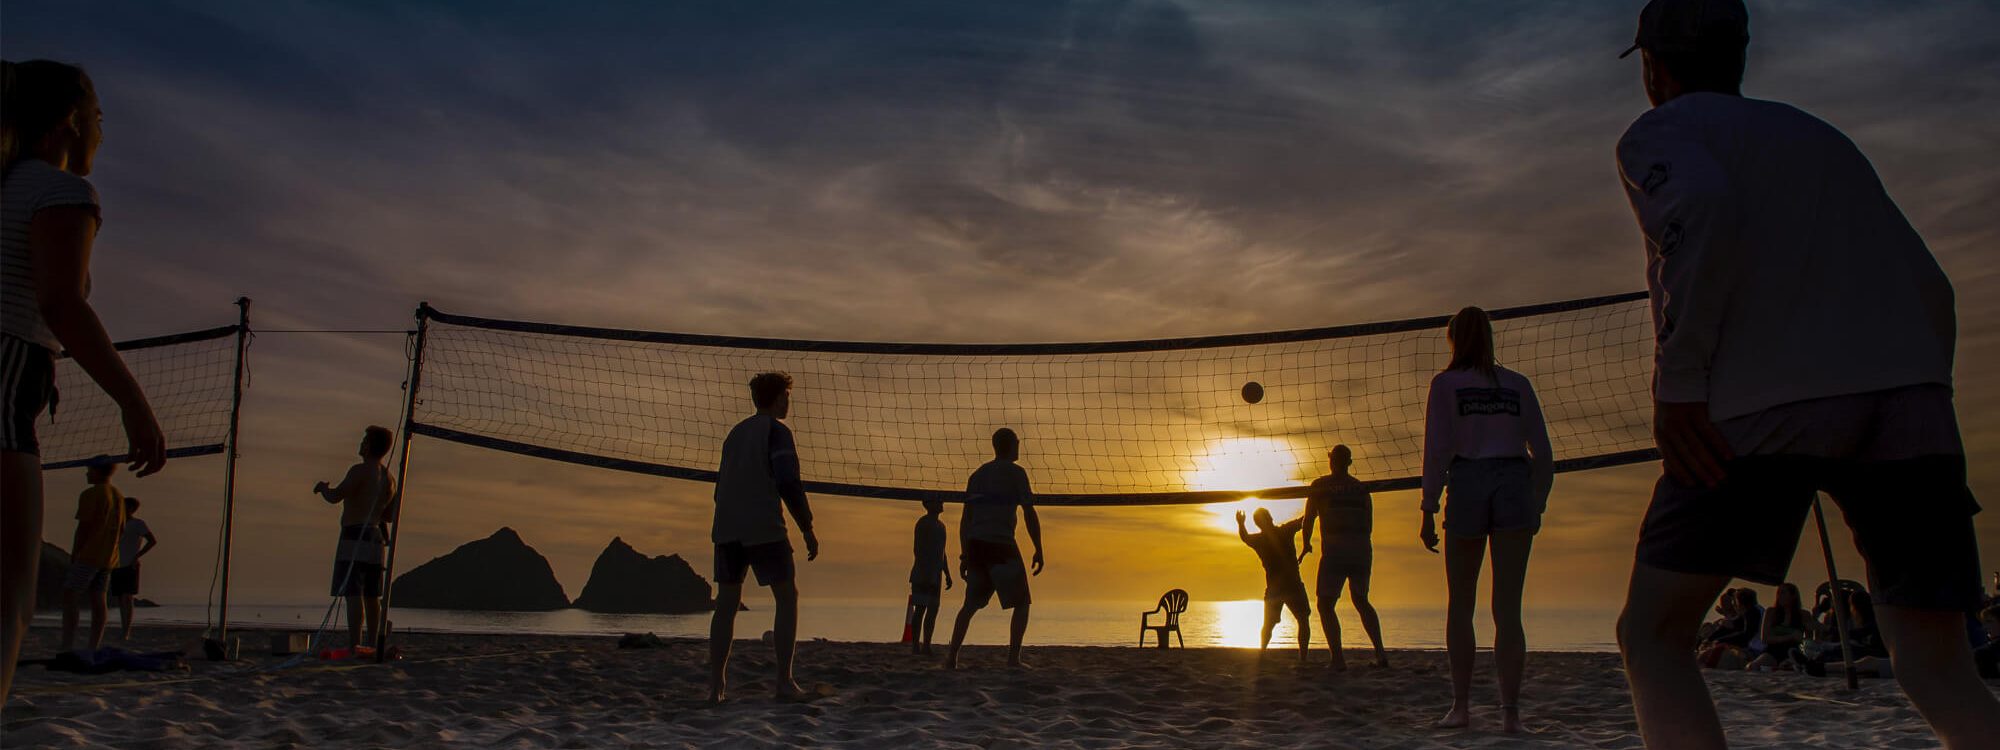 volleyball sunset 2000x750 - People...